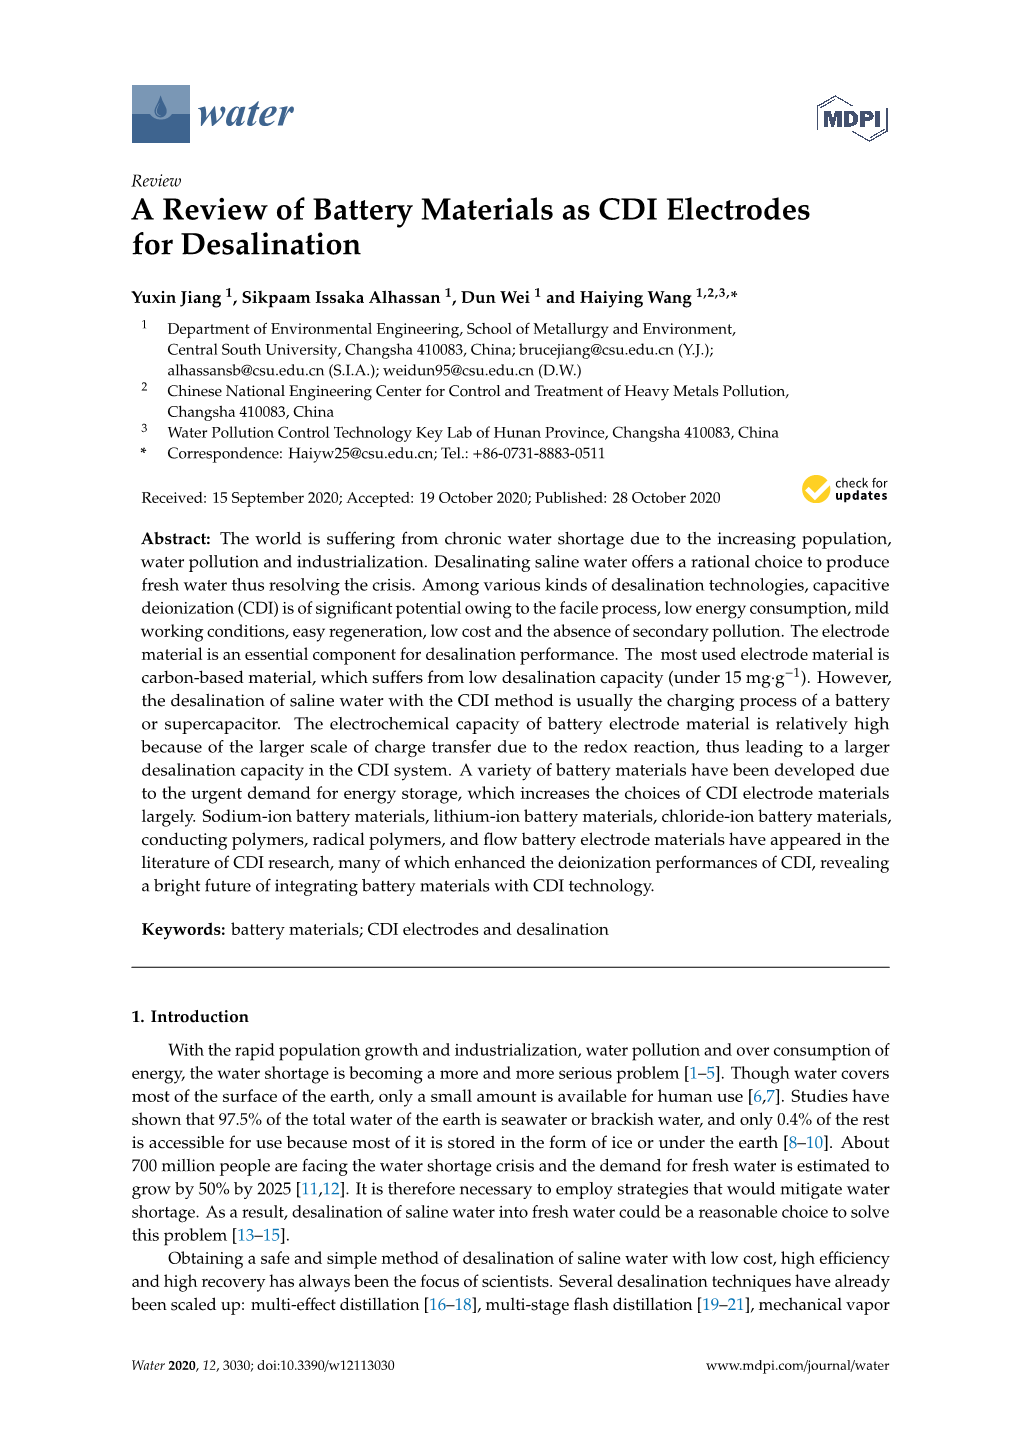 A Review of Battery Materials As CDI Electrodes for Desalination